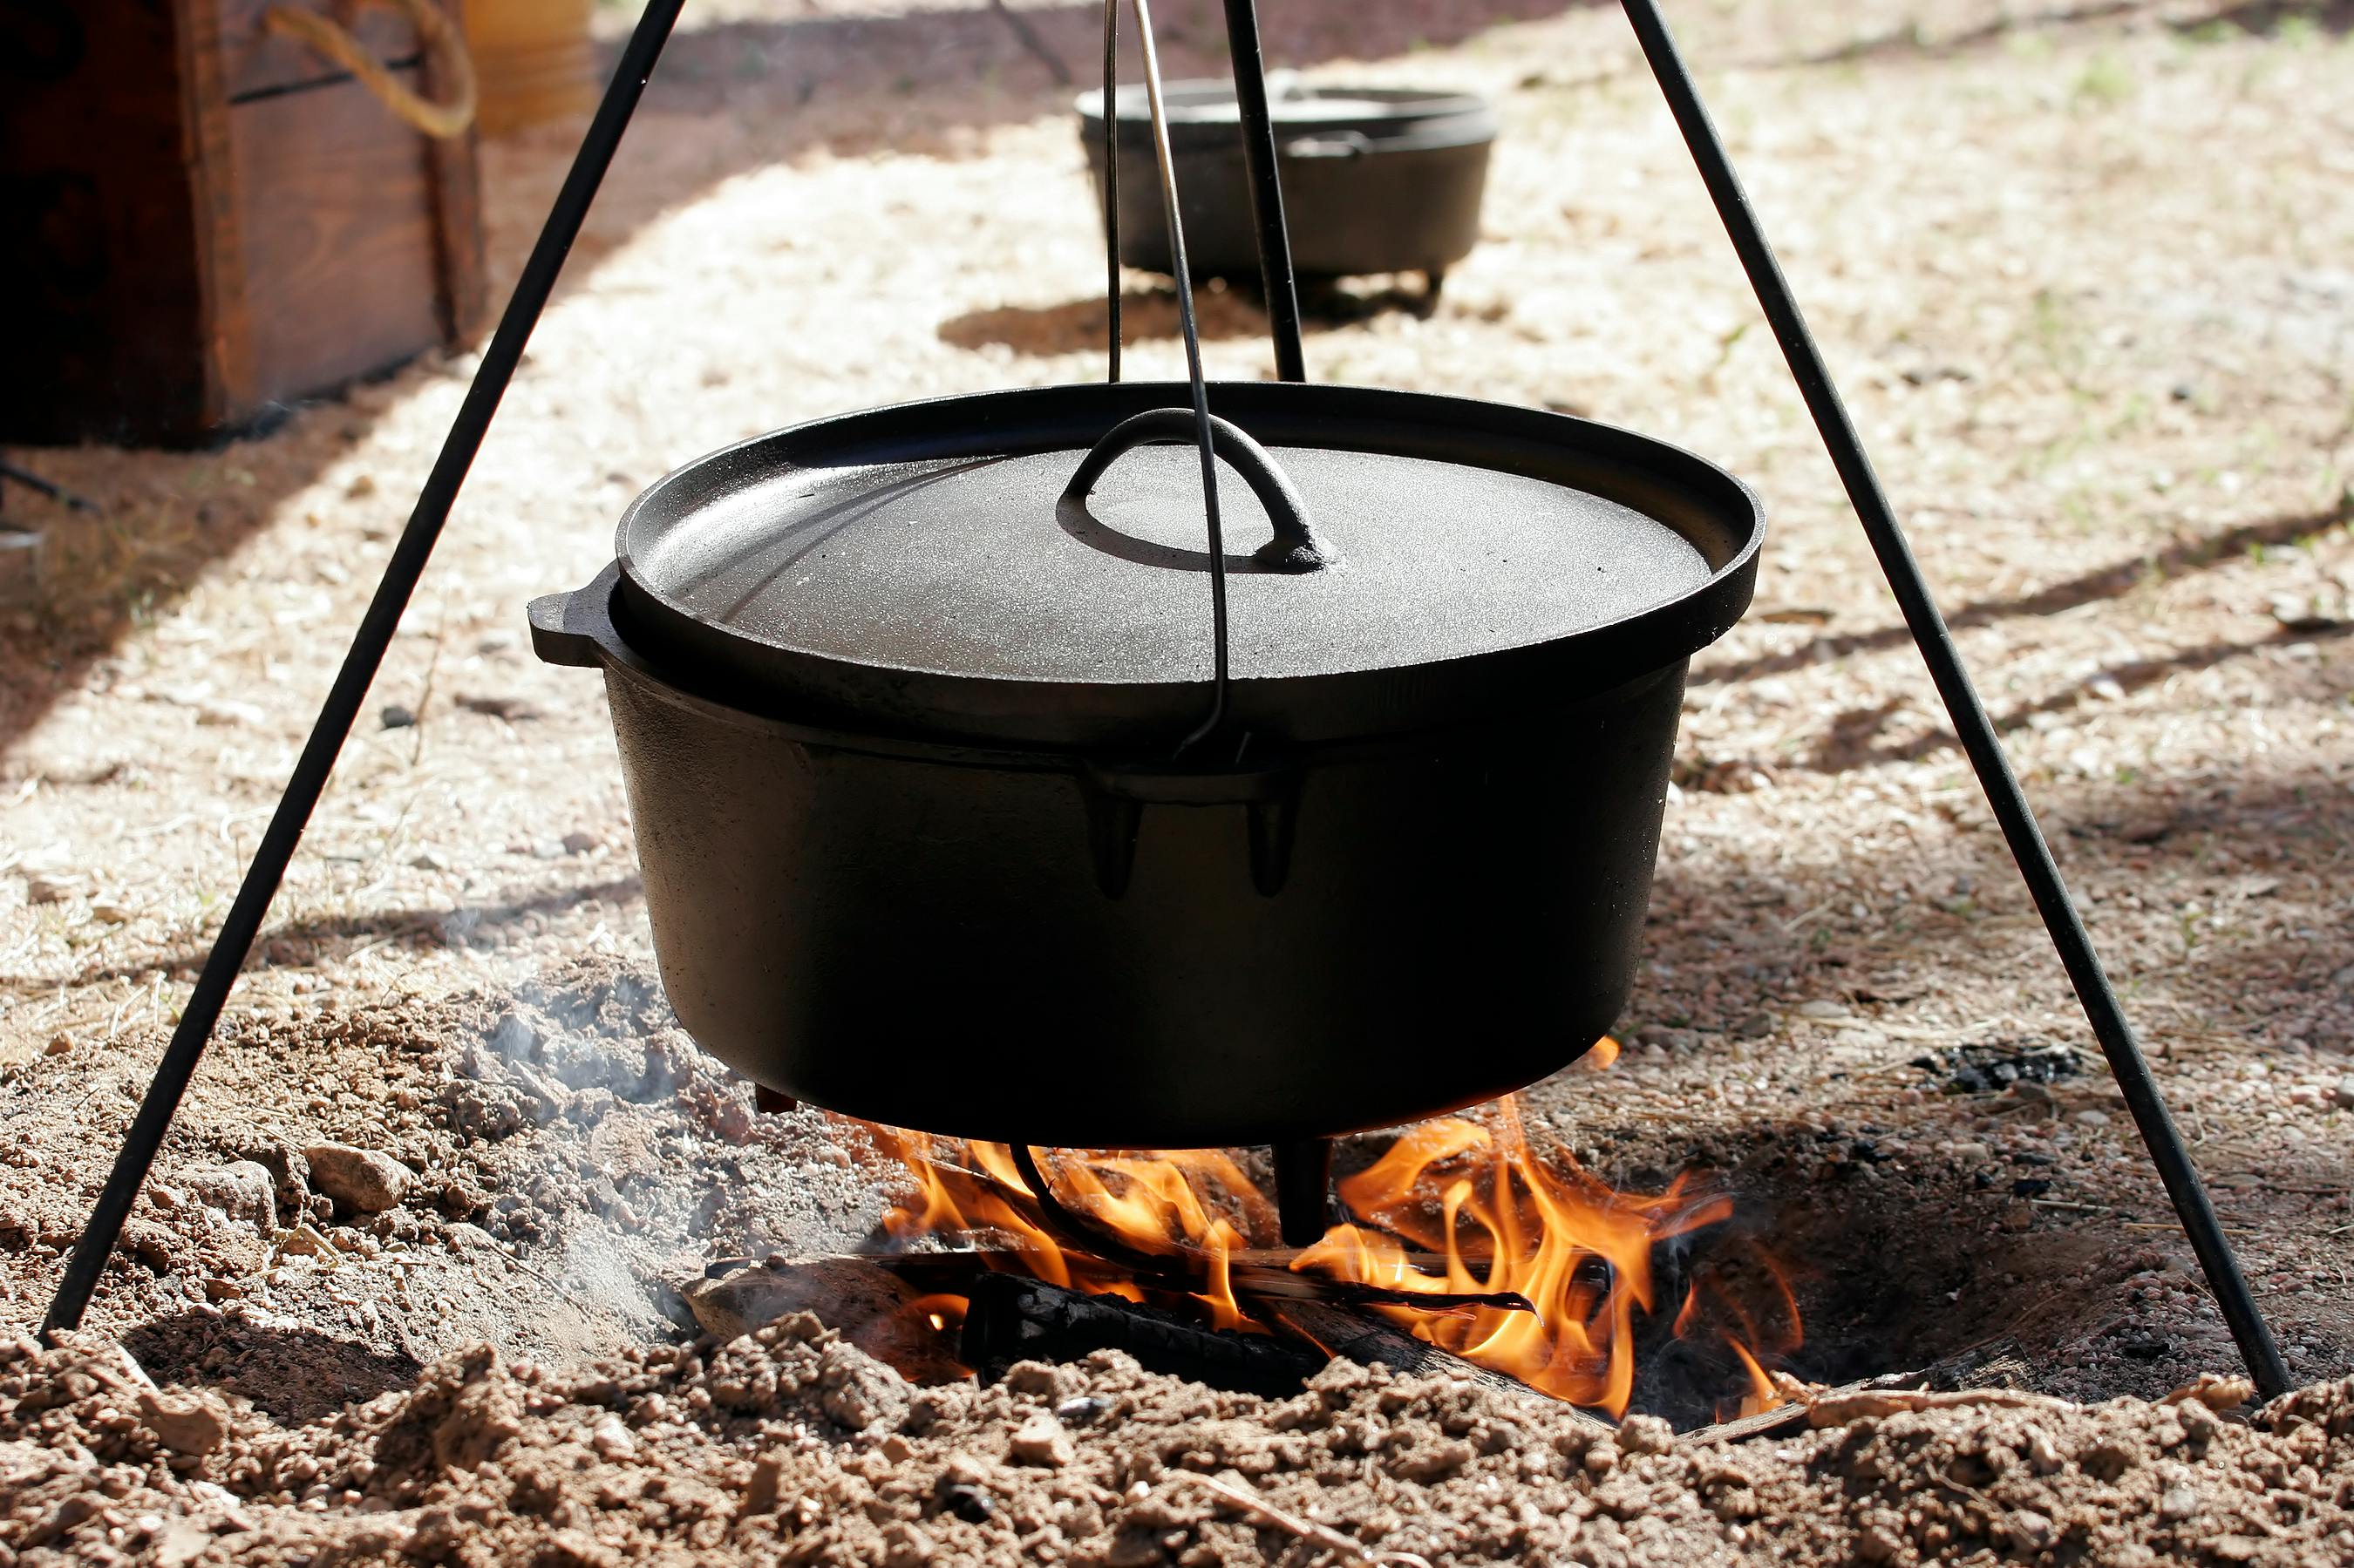 A Complete Guide to Choosing the Perfect Brandani Dutch Oven